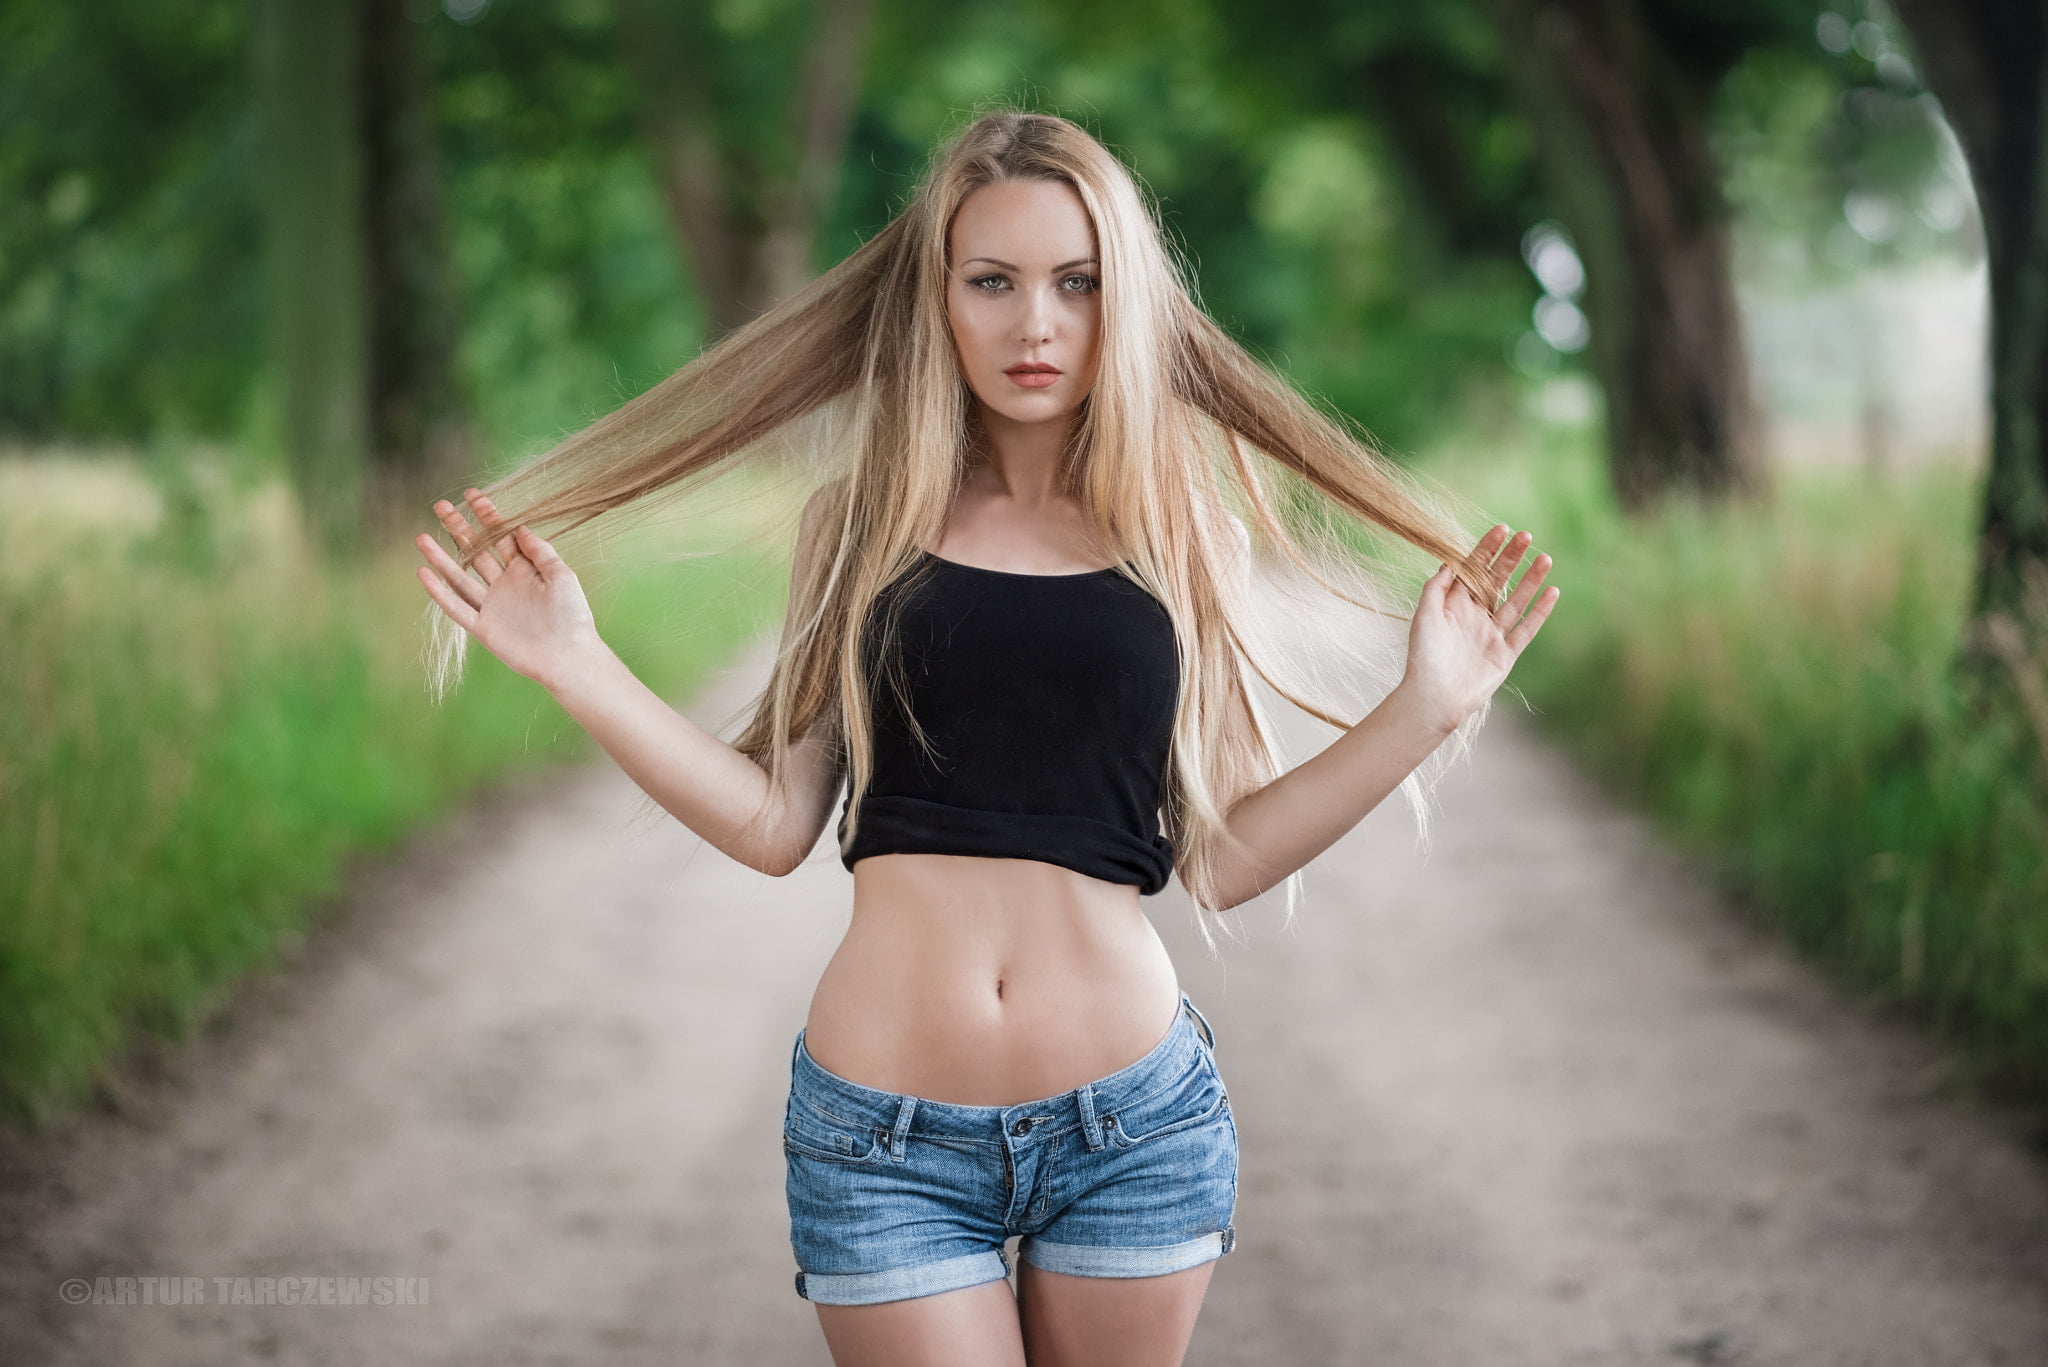 Blonde with long hair puts on denim shorts. A - Stock Photo